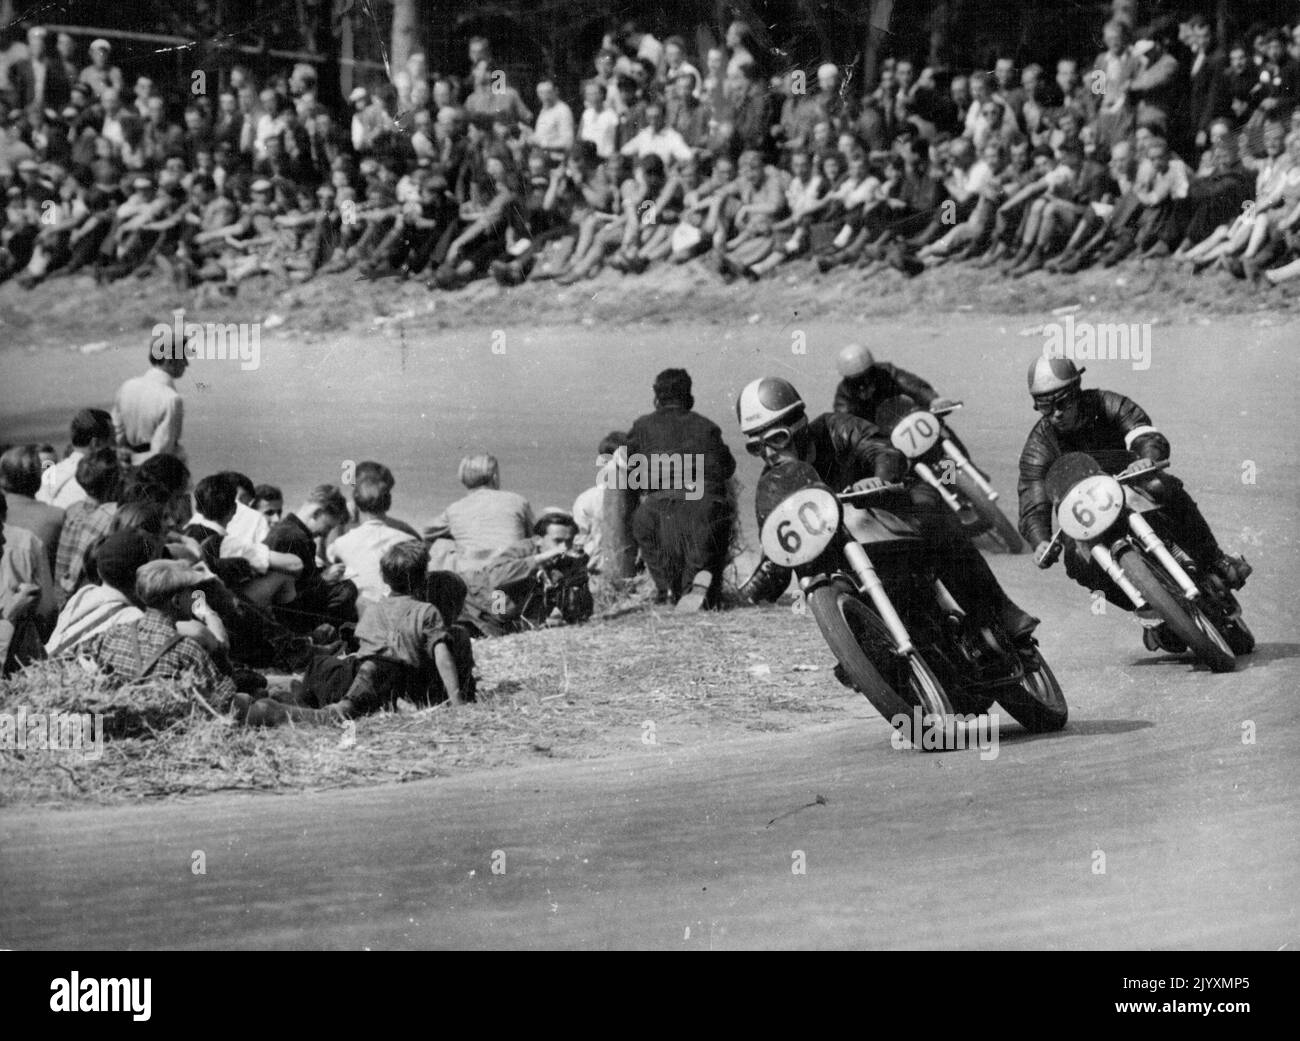 Duke wins in Germany - In the 350 cc event Geoffrey Duke (60) leads Johnny Lockett (65), of Britain who was second, and Ken Kavanagh of Australia (70) who was third. All are driving British Norton machines. British Geoffrey Duke set two new track records at the ***** race course near Stuttgart, August 26, when he won both the major events of the German motor-cycle Grand Prix. He won the 500 cc event at an average of 136 kmph (about 84.5 mph) and the 350 cc event at 130.6 kmph (about 81 mph). September 8, 1951. Stock Photo